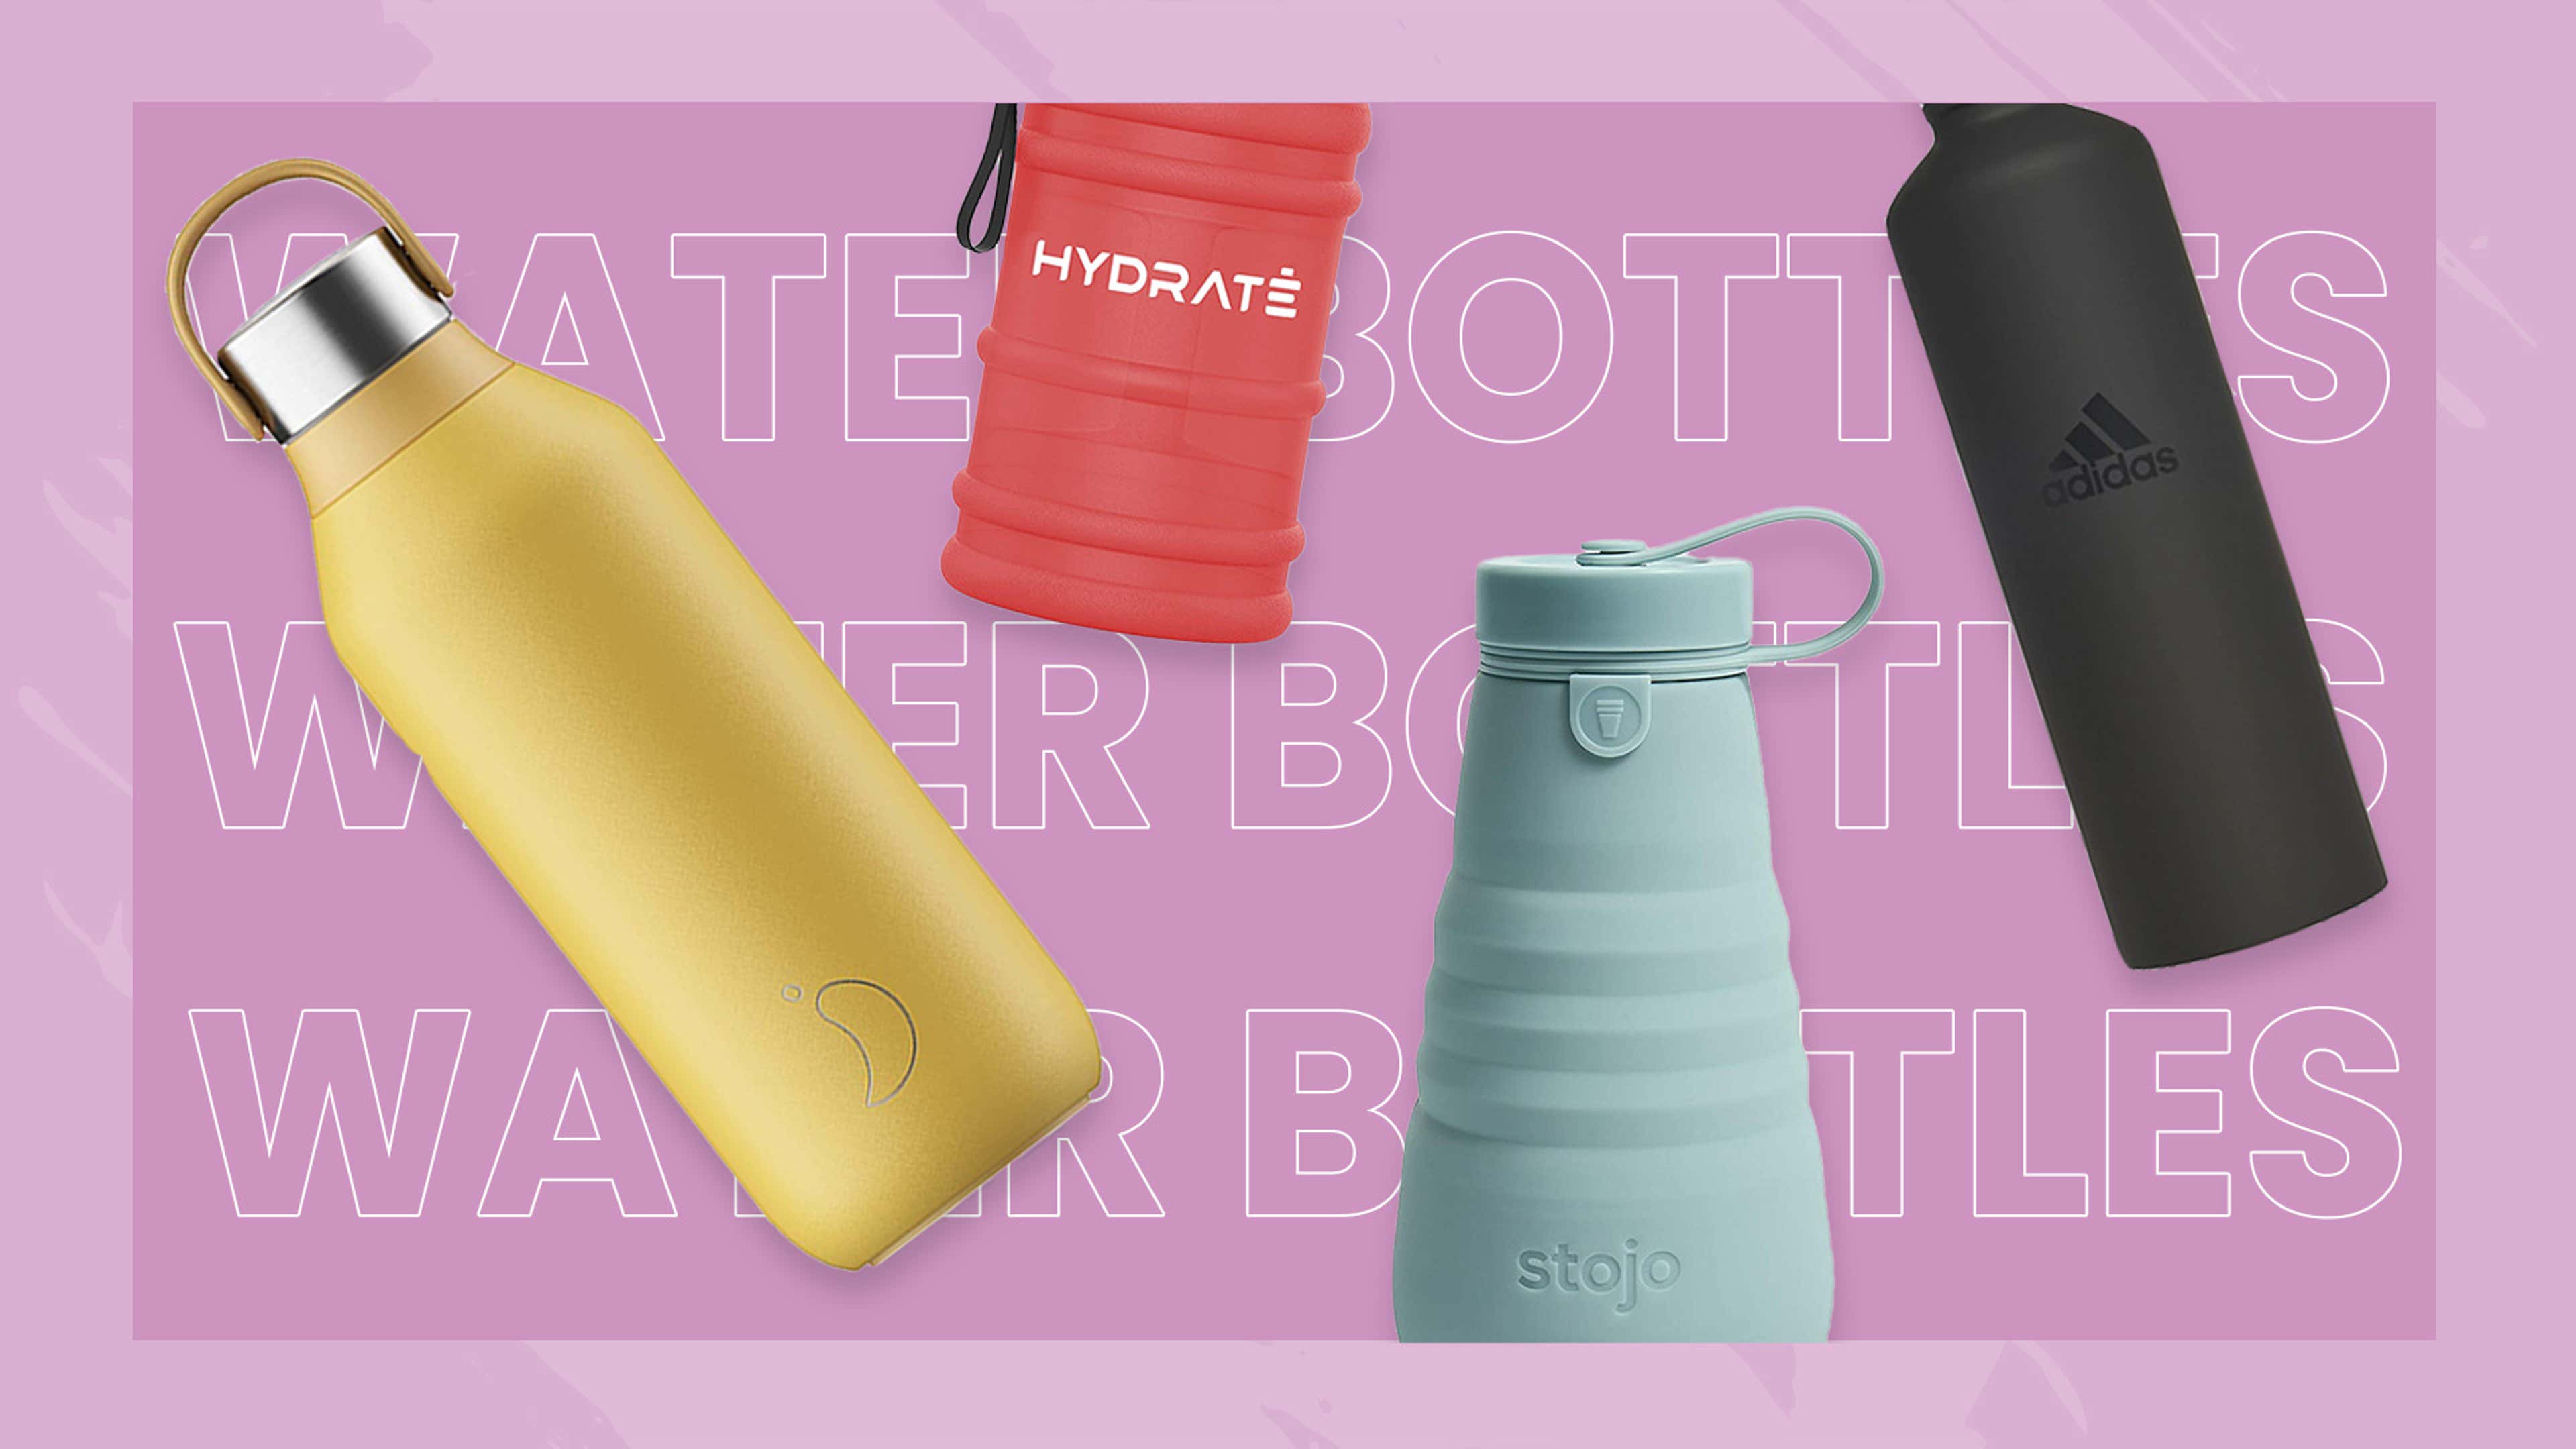 The best reusable water bottles you can buy in 2023